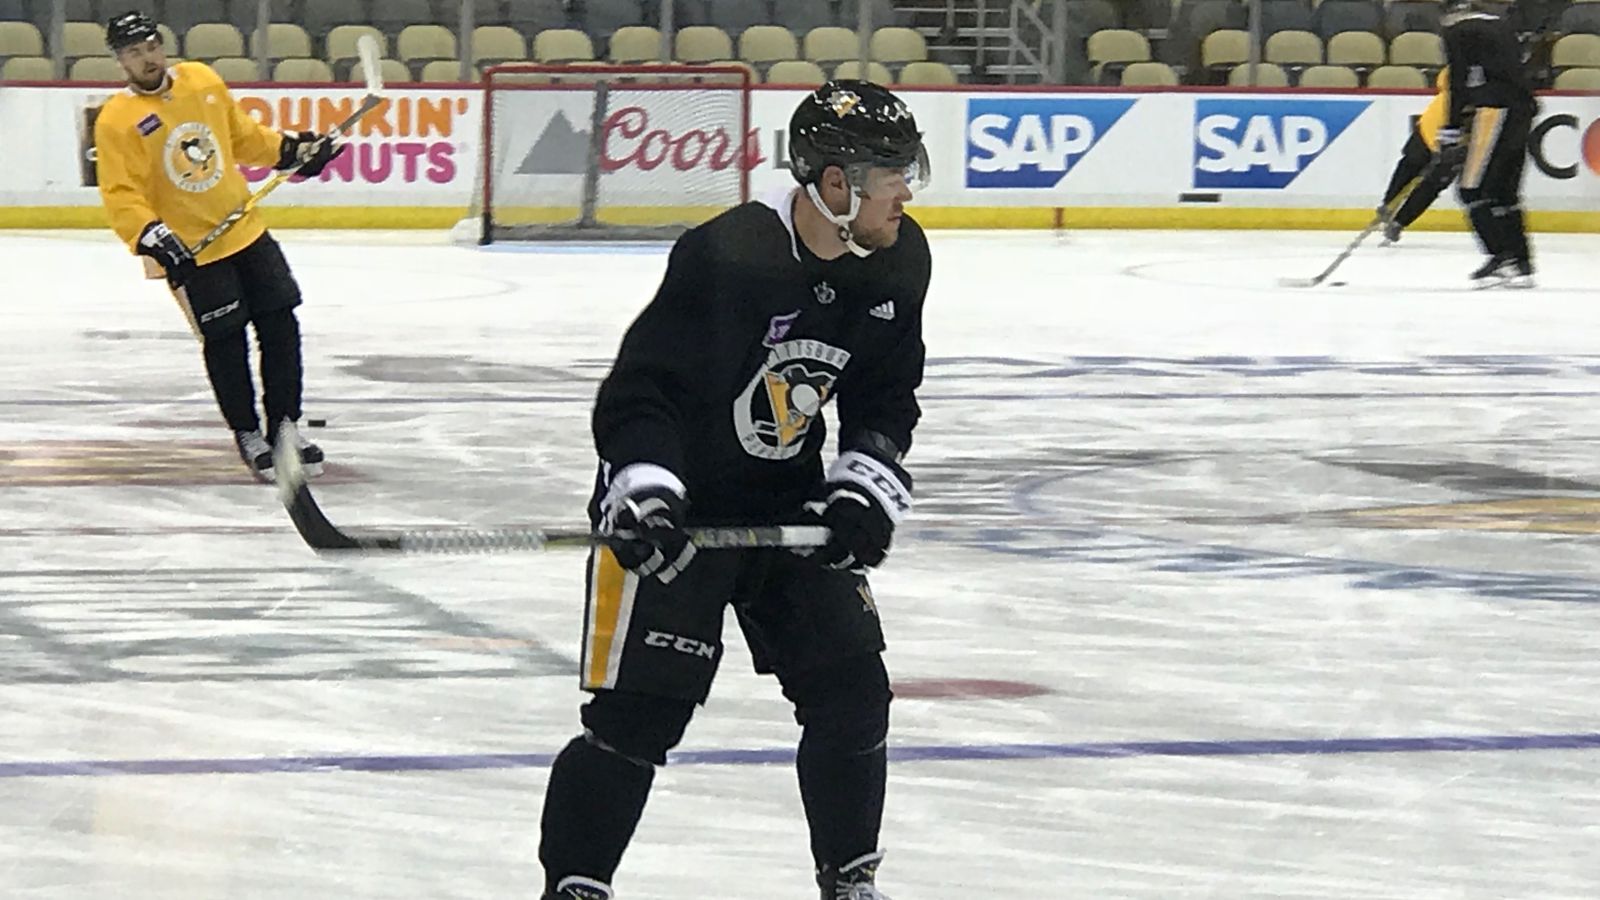 Images From Capitals' Morning Skate At PPG Paints Arena in Pittsburgh  (Photos)